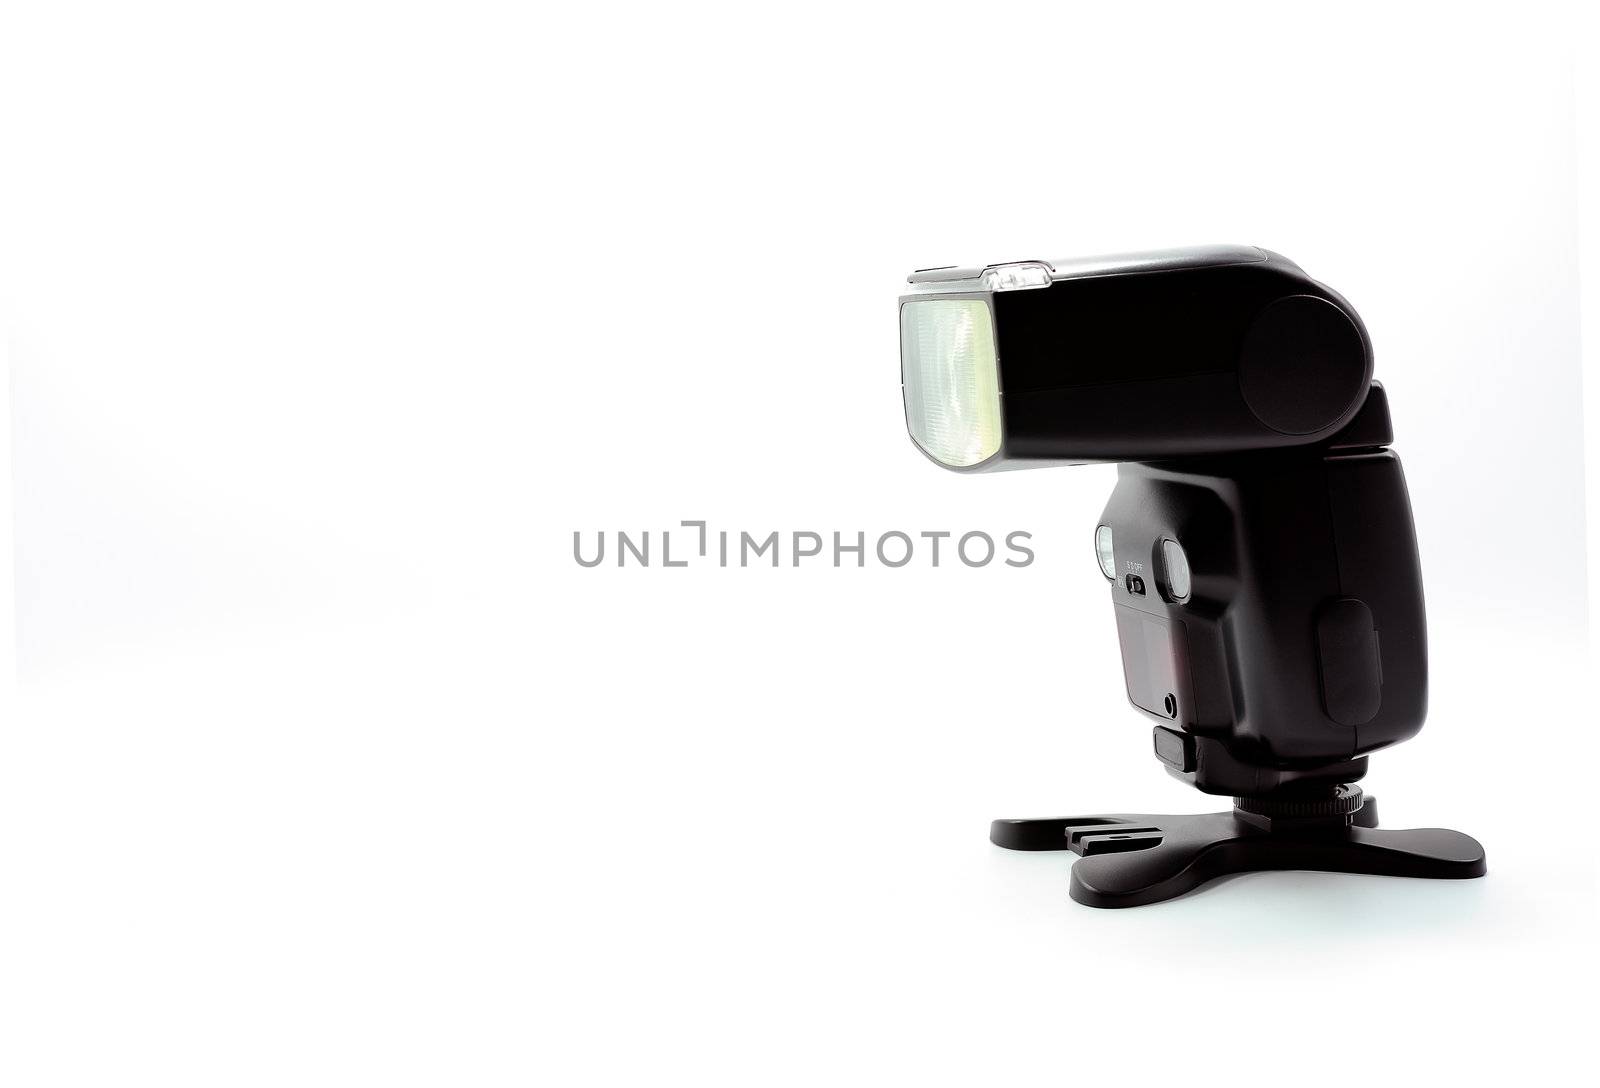 Camera flash light front side view on white back ground